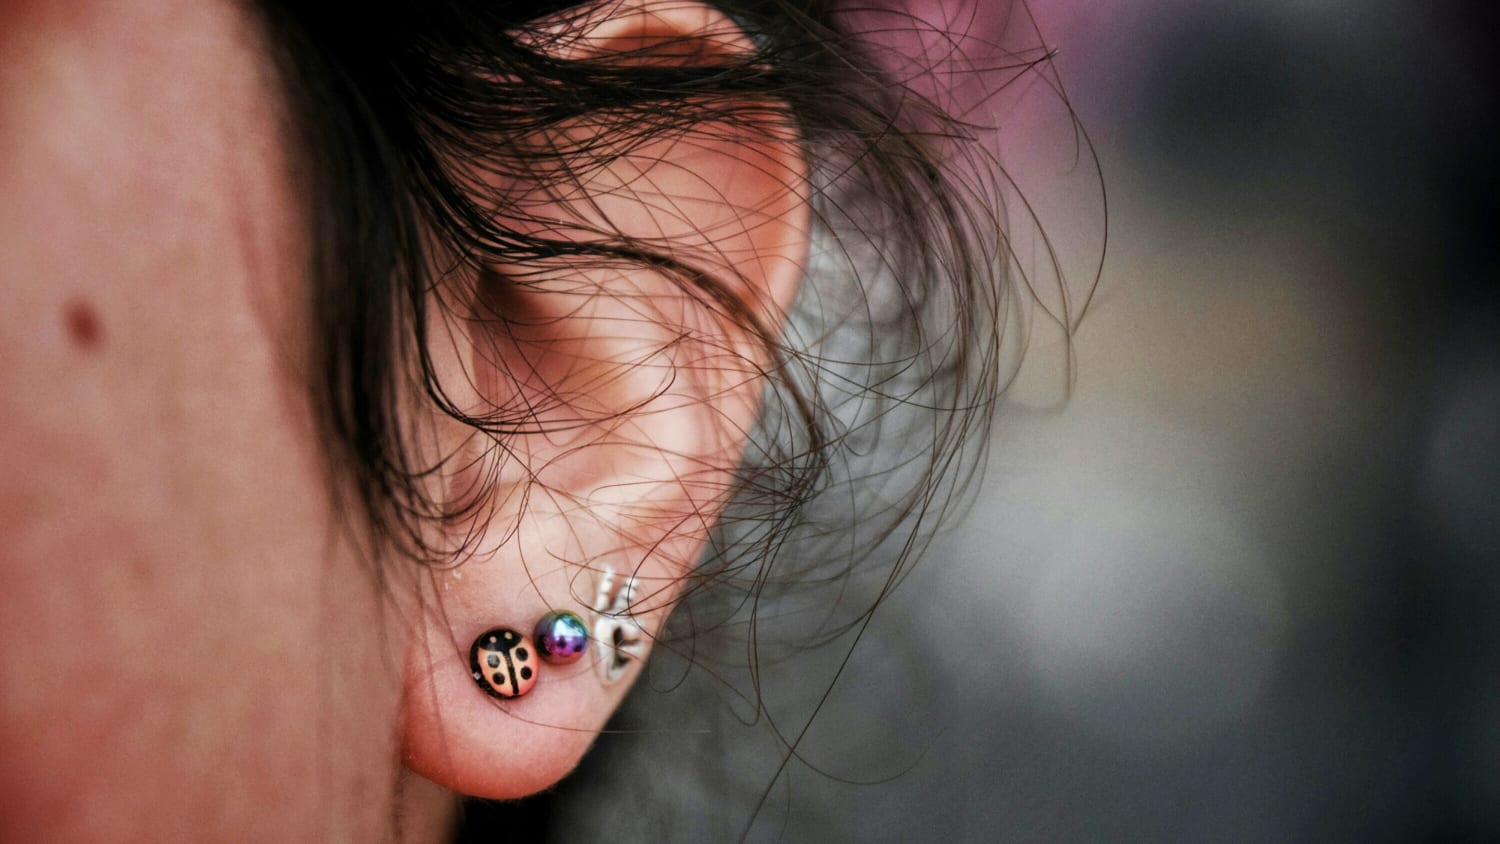 infected ear cartilage piercing